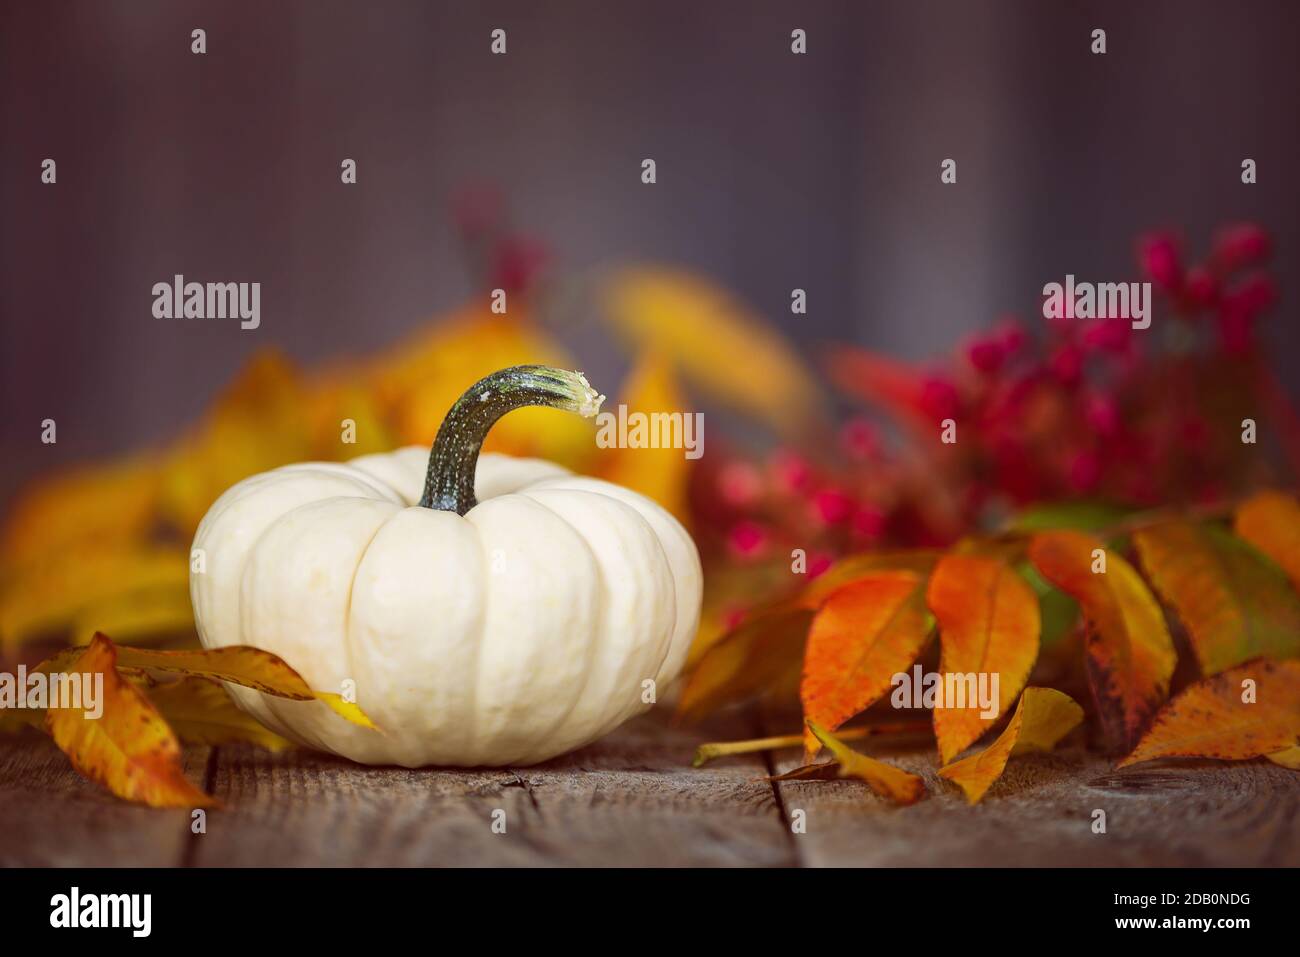 White Mini pumpkin on rustic wooden table. Displayed with colorful autumn leaves and red berries. Stock Photo